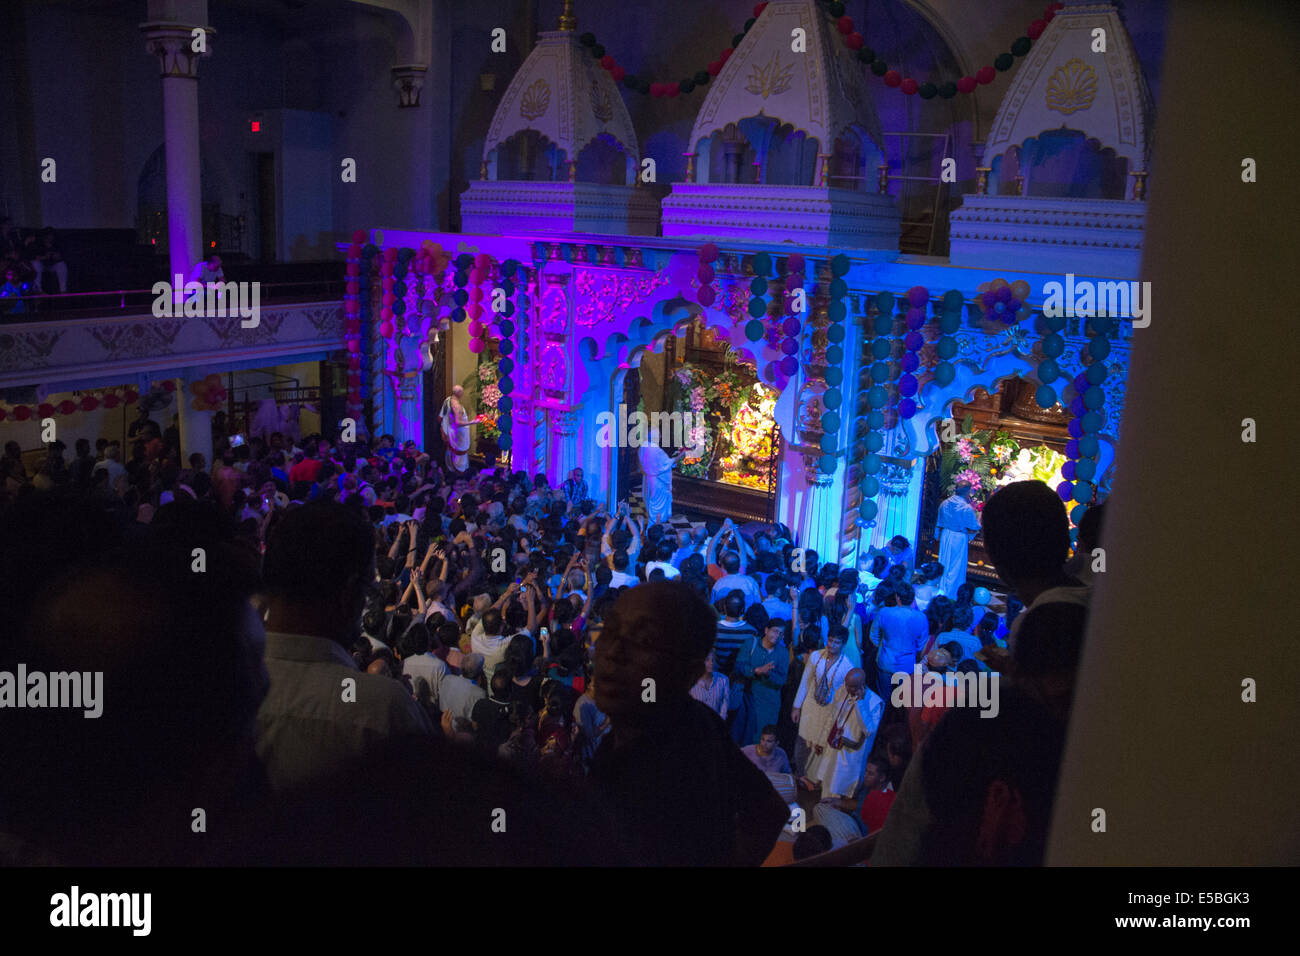 TORONTO, ONTARIO/CANADA - 28 August 2013 : People in large numbers celebrating krishna`s birthday in Iscon temple, Toronto Stock Photo